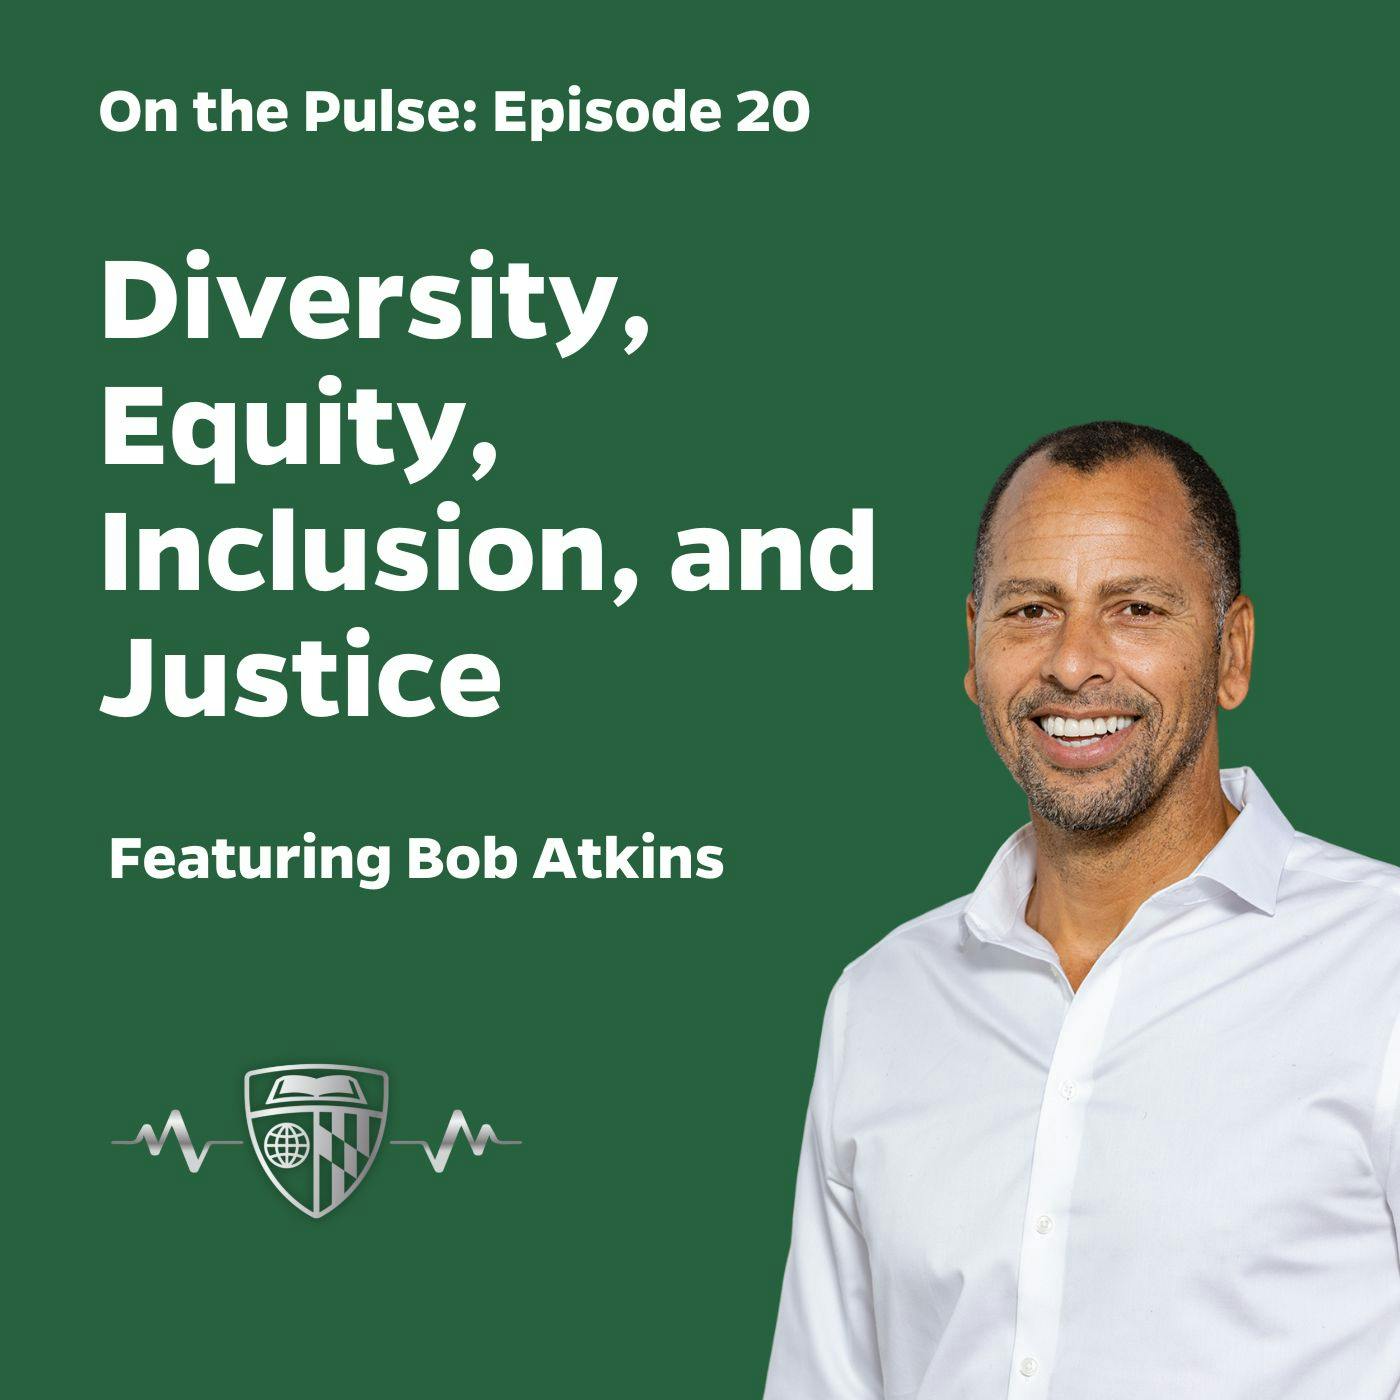 On The Pulse: Diversity, Equity, Inclusion, and Justice